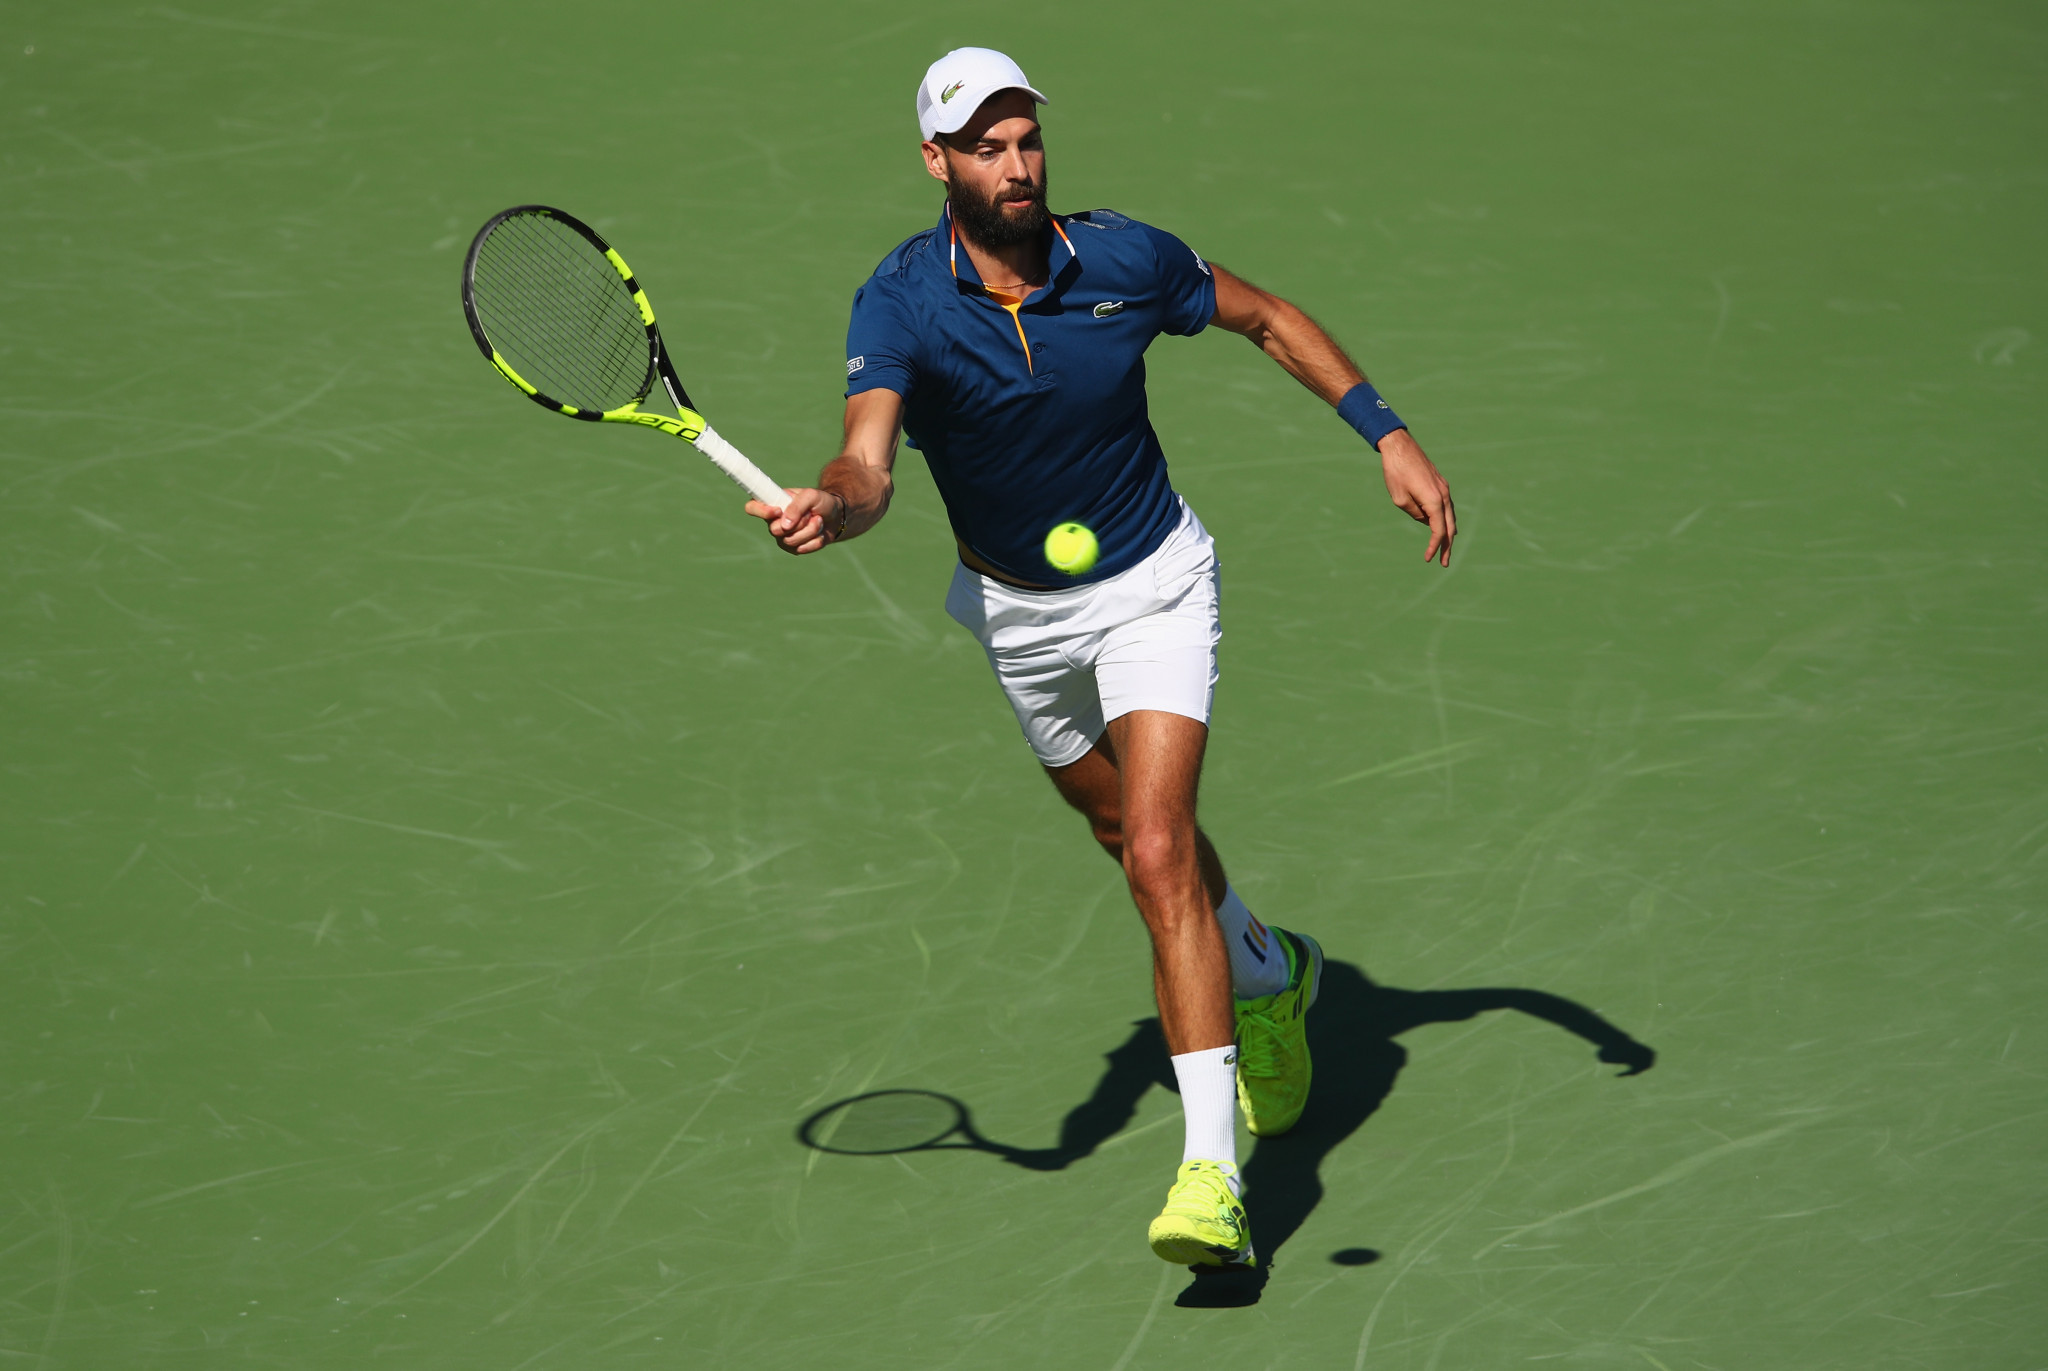 Benoit Paire stunned Novak Djokovic to reach the third round of the Miami Open ©Getty Images